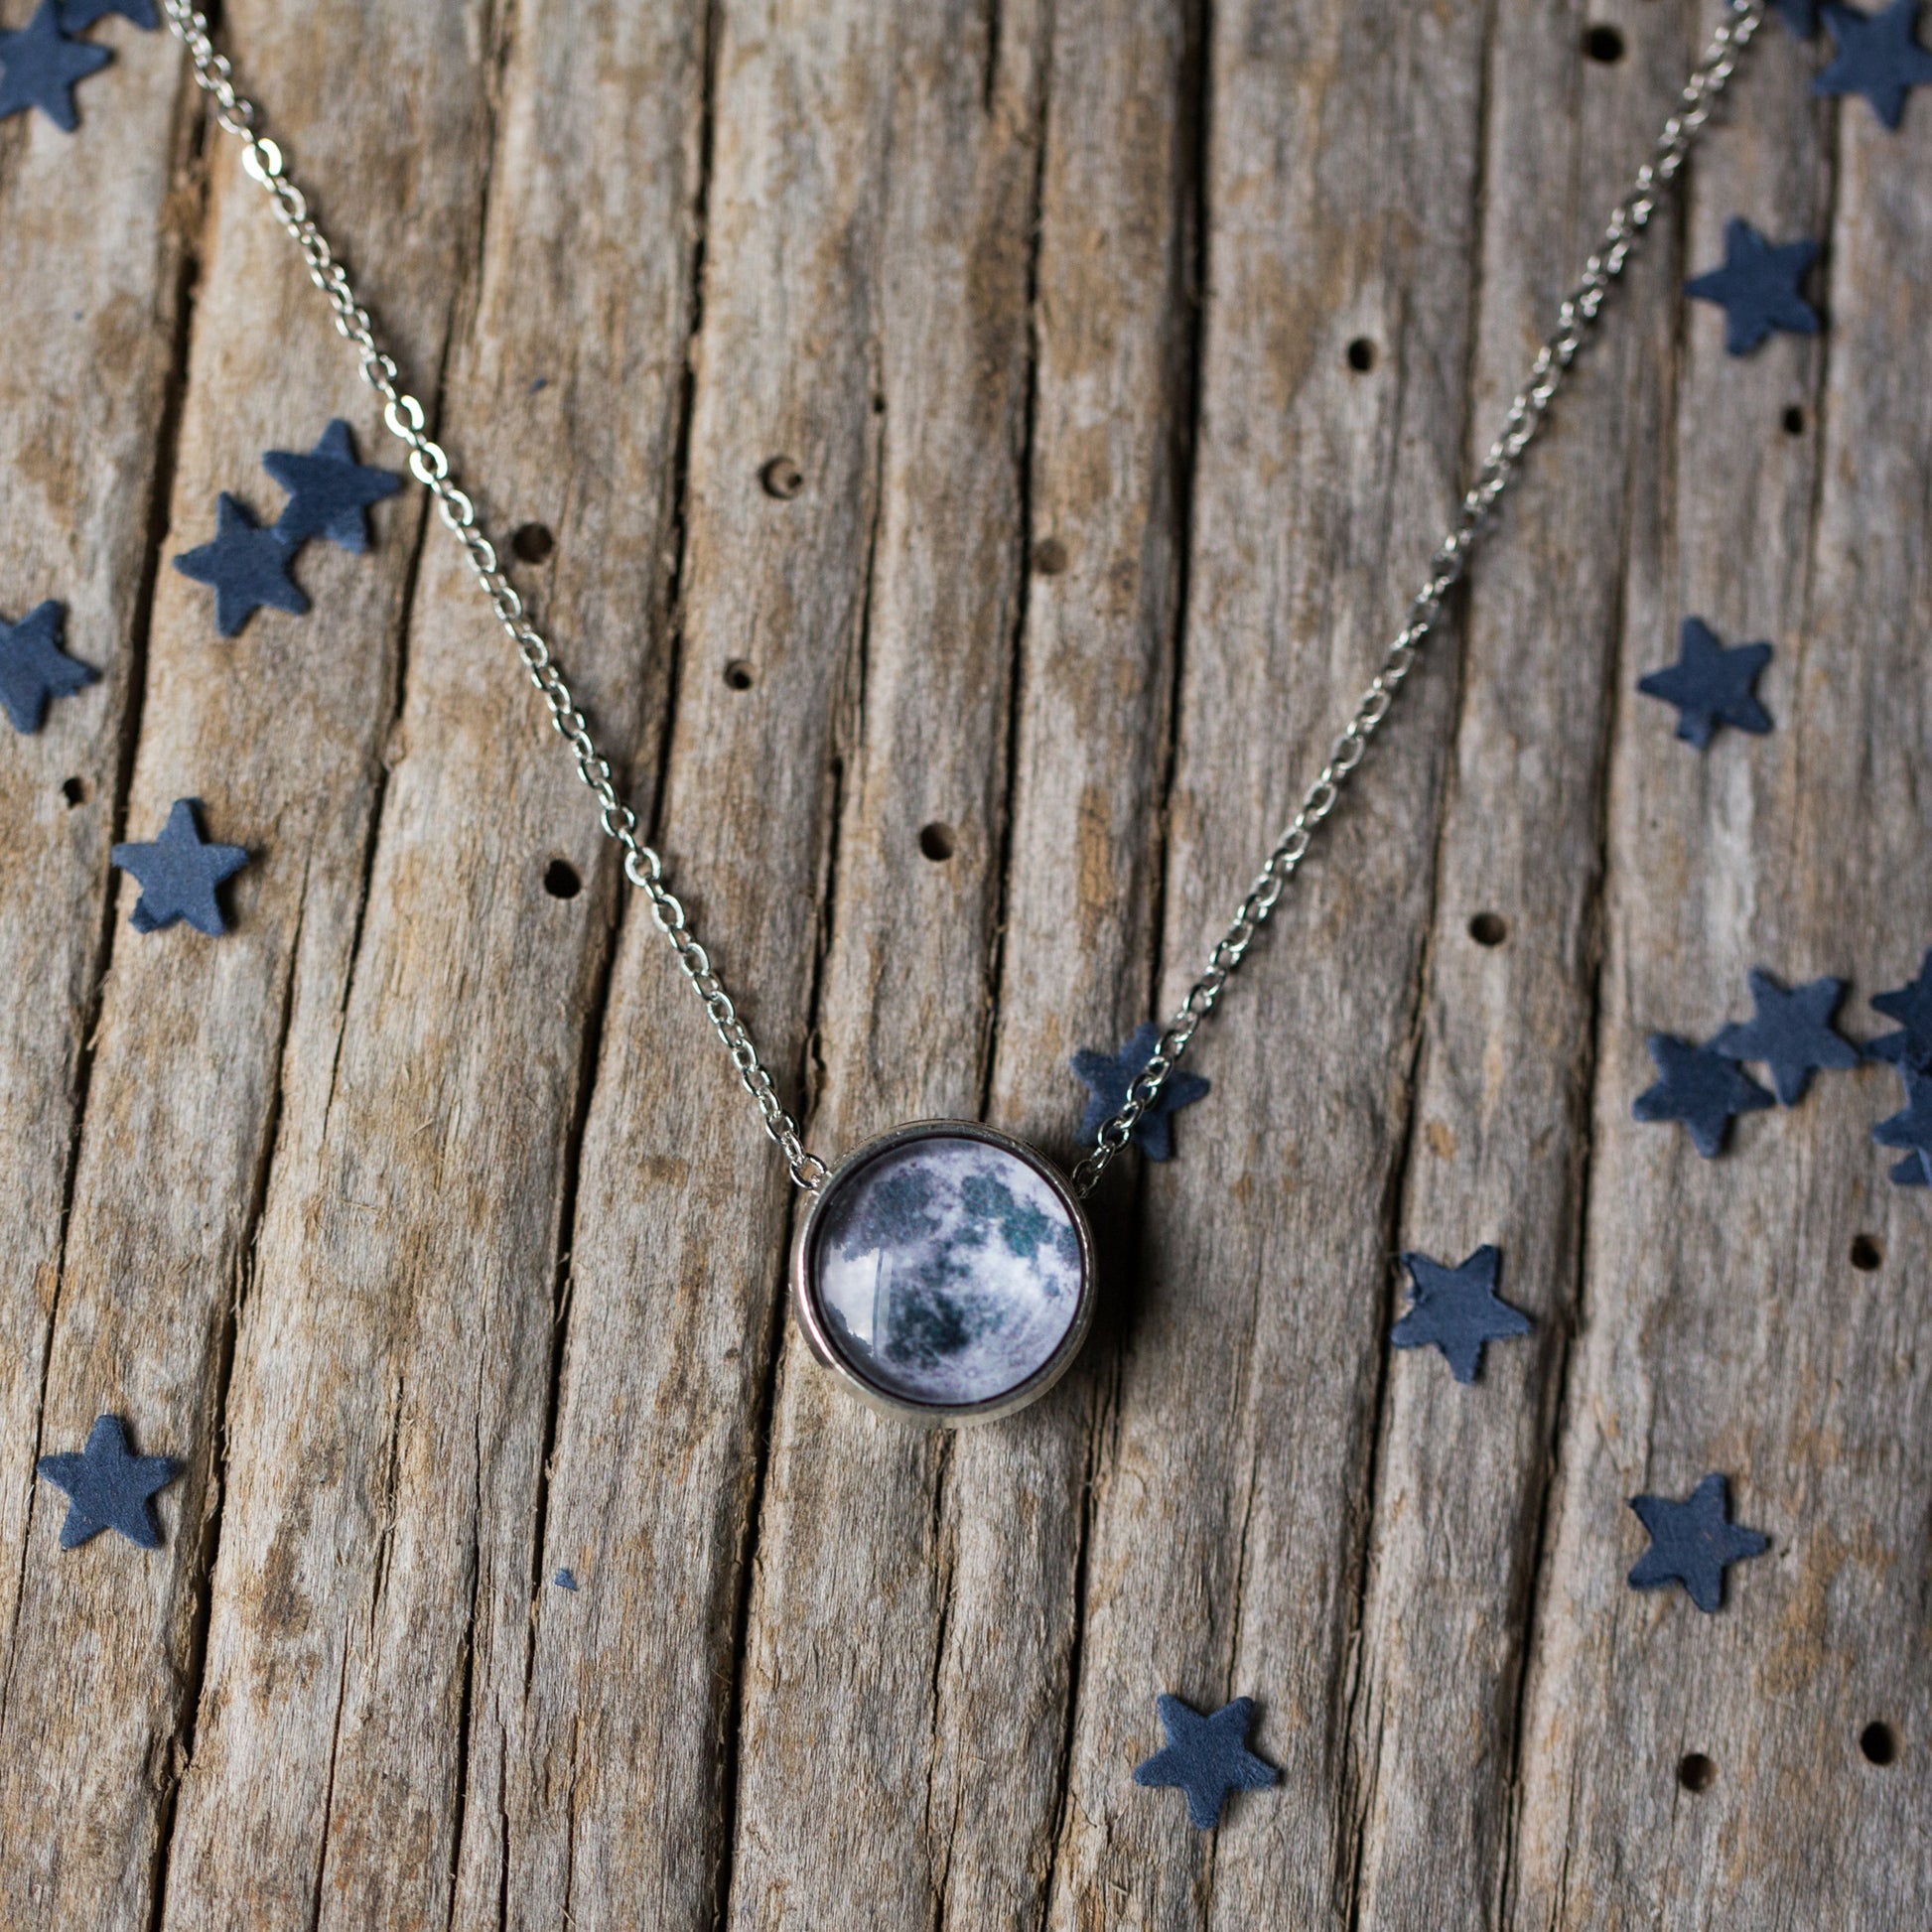 Space Necklace - Pick Your Planet or Nebula Slide Galaxy Pendant Necklace Yugen Handmade   